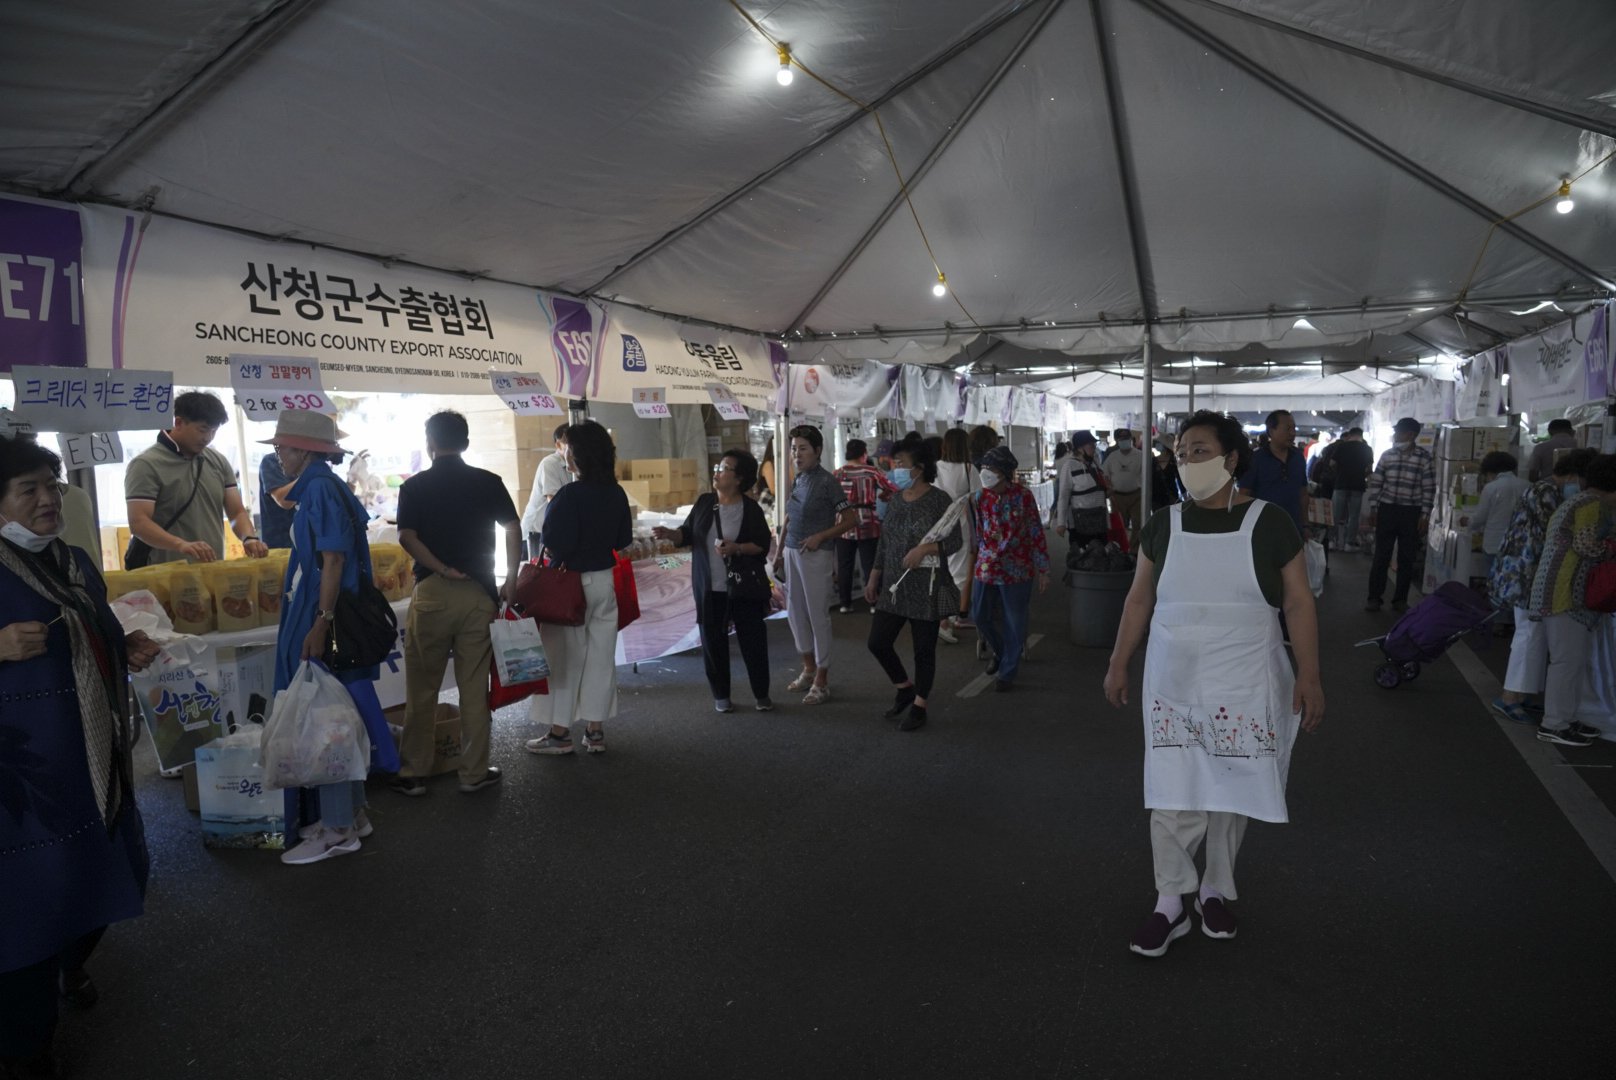  Attendees browse the available wares during the 49th annual Los Angeles Korean Festival Friday, September 23 2022 at the Seoul International Park. The 49th incarnation marks the return of the in-person festival following a two-year COVID hiatus.  (T